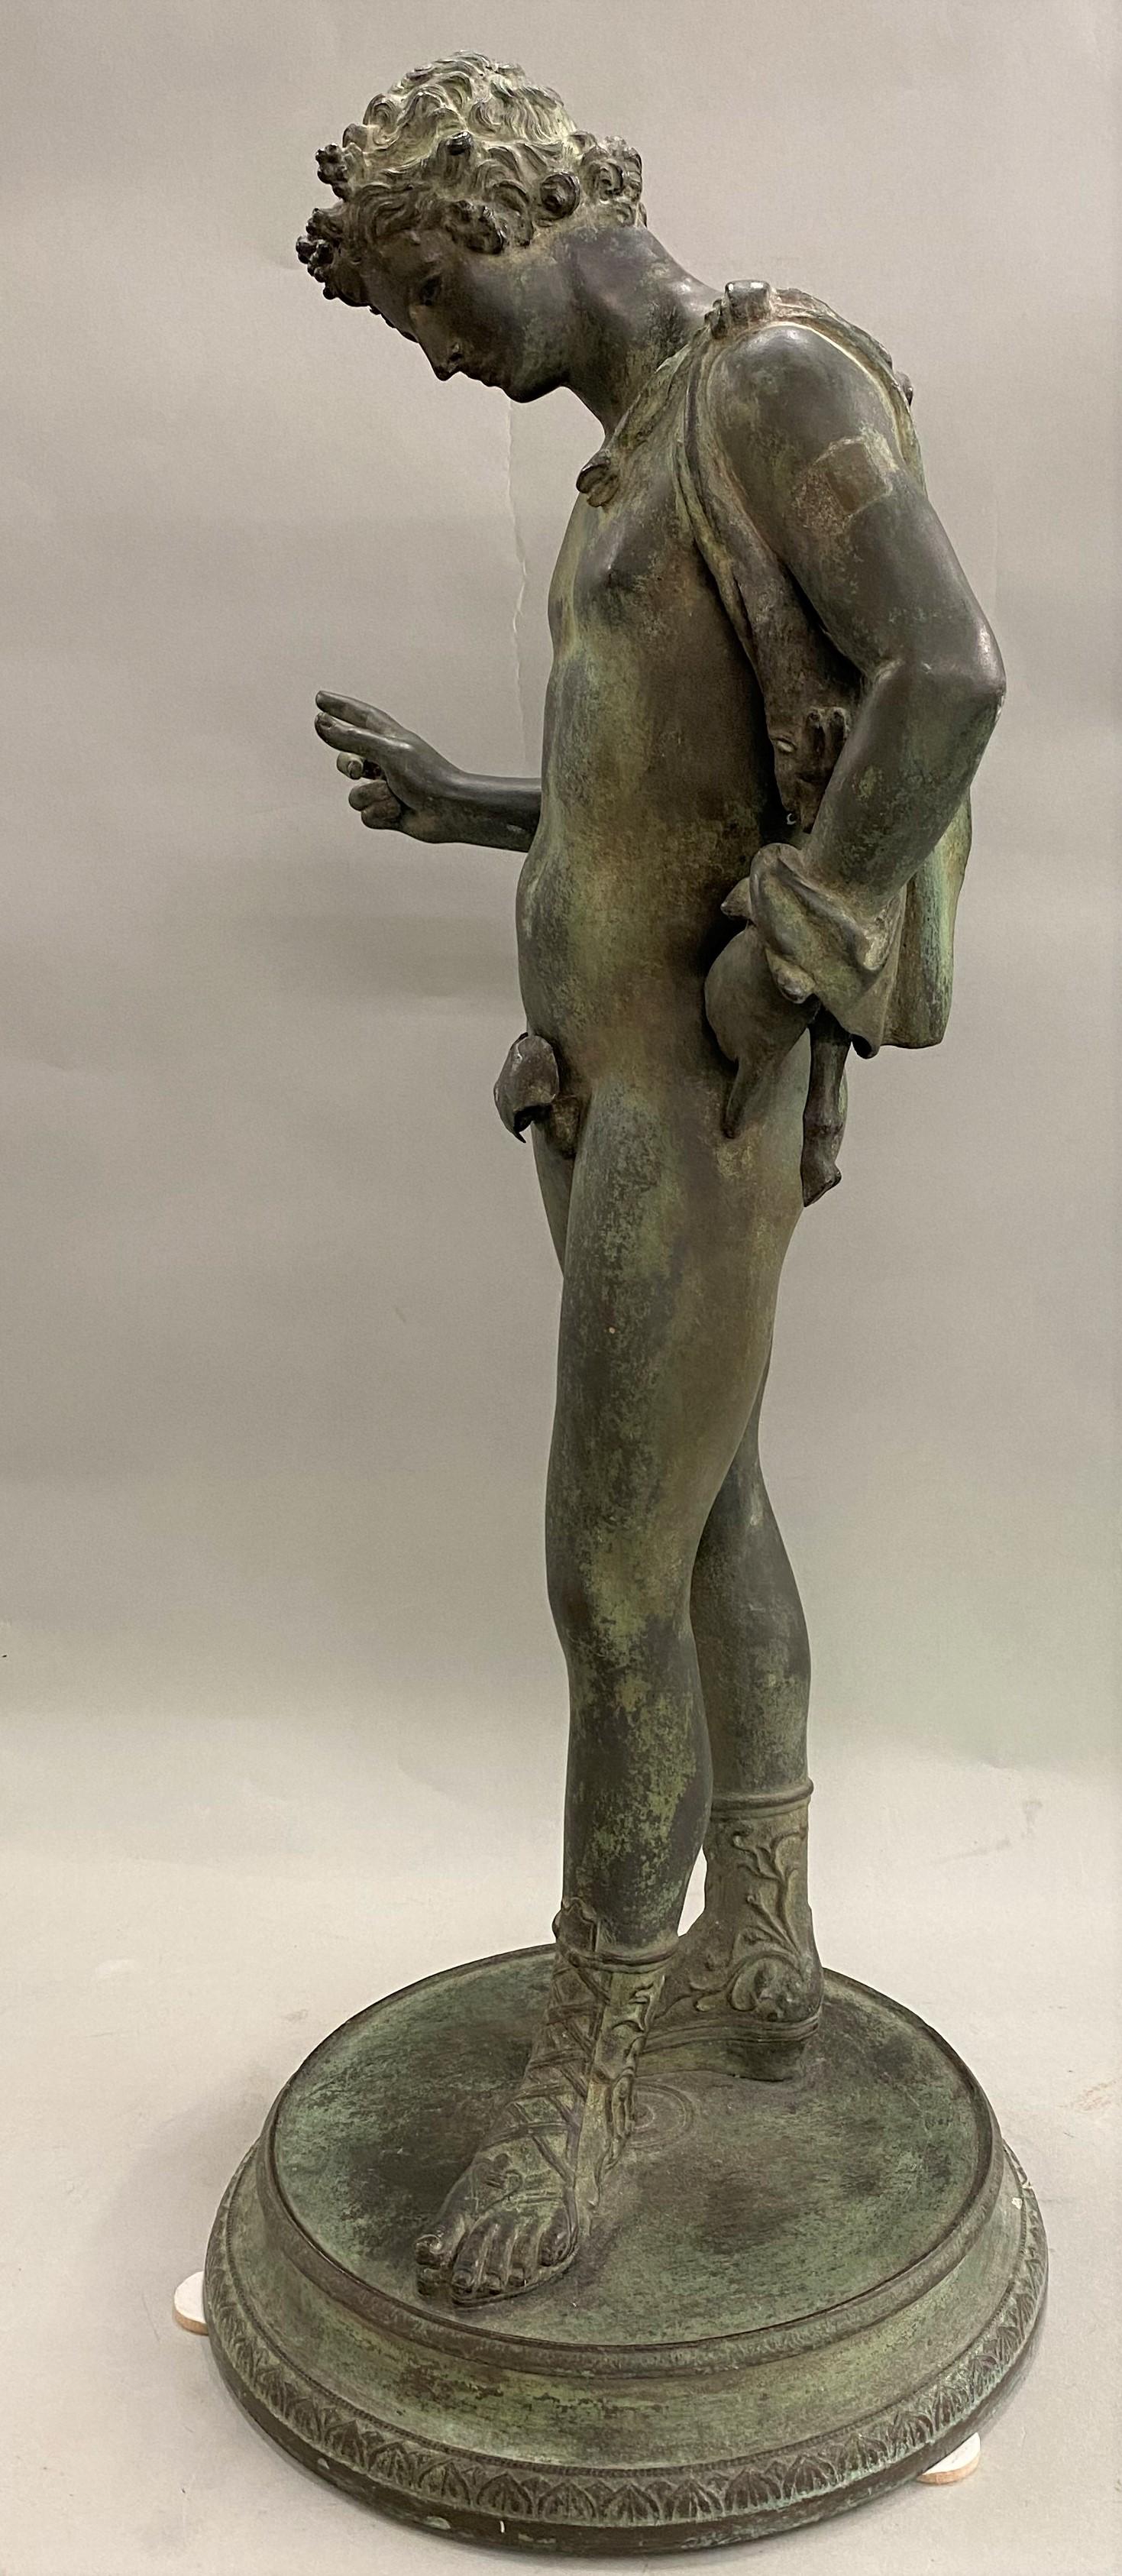 A fine Grand Tour Italian Classical cast patinated bronze figure of Narcissus or Dionysus, dating to the last quarter of the 19th century. Very good overall condition, with the modesty leaf loosely attached with adhesive, and great verdigris patina.